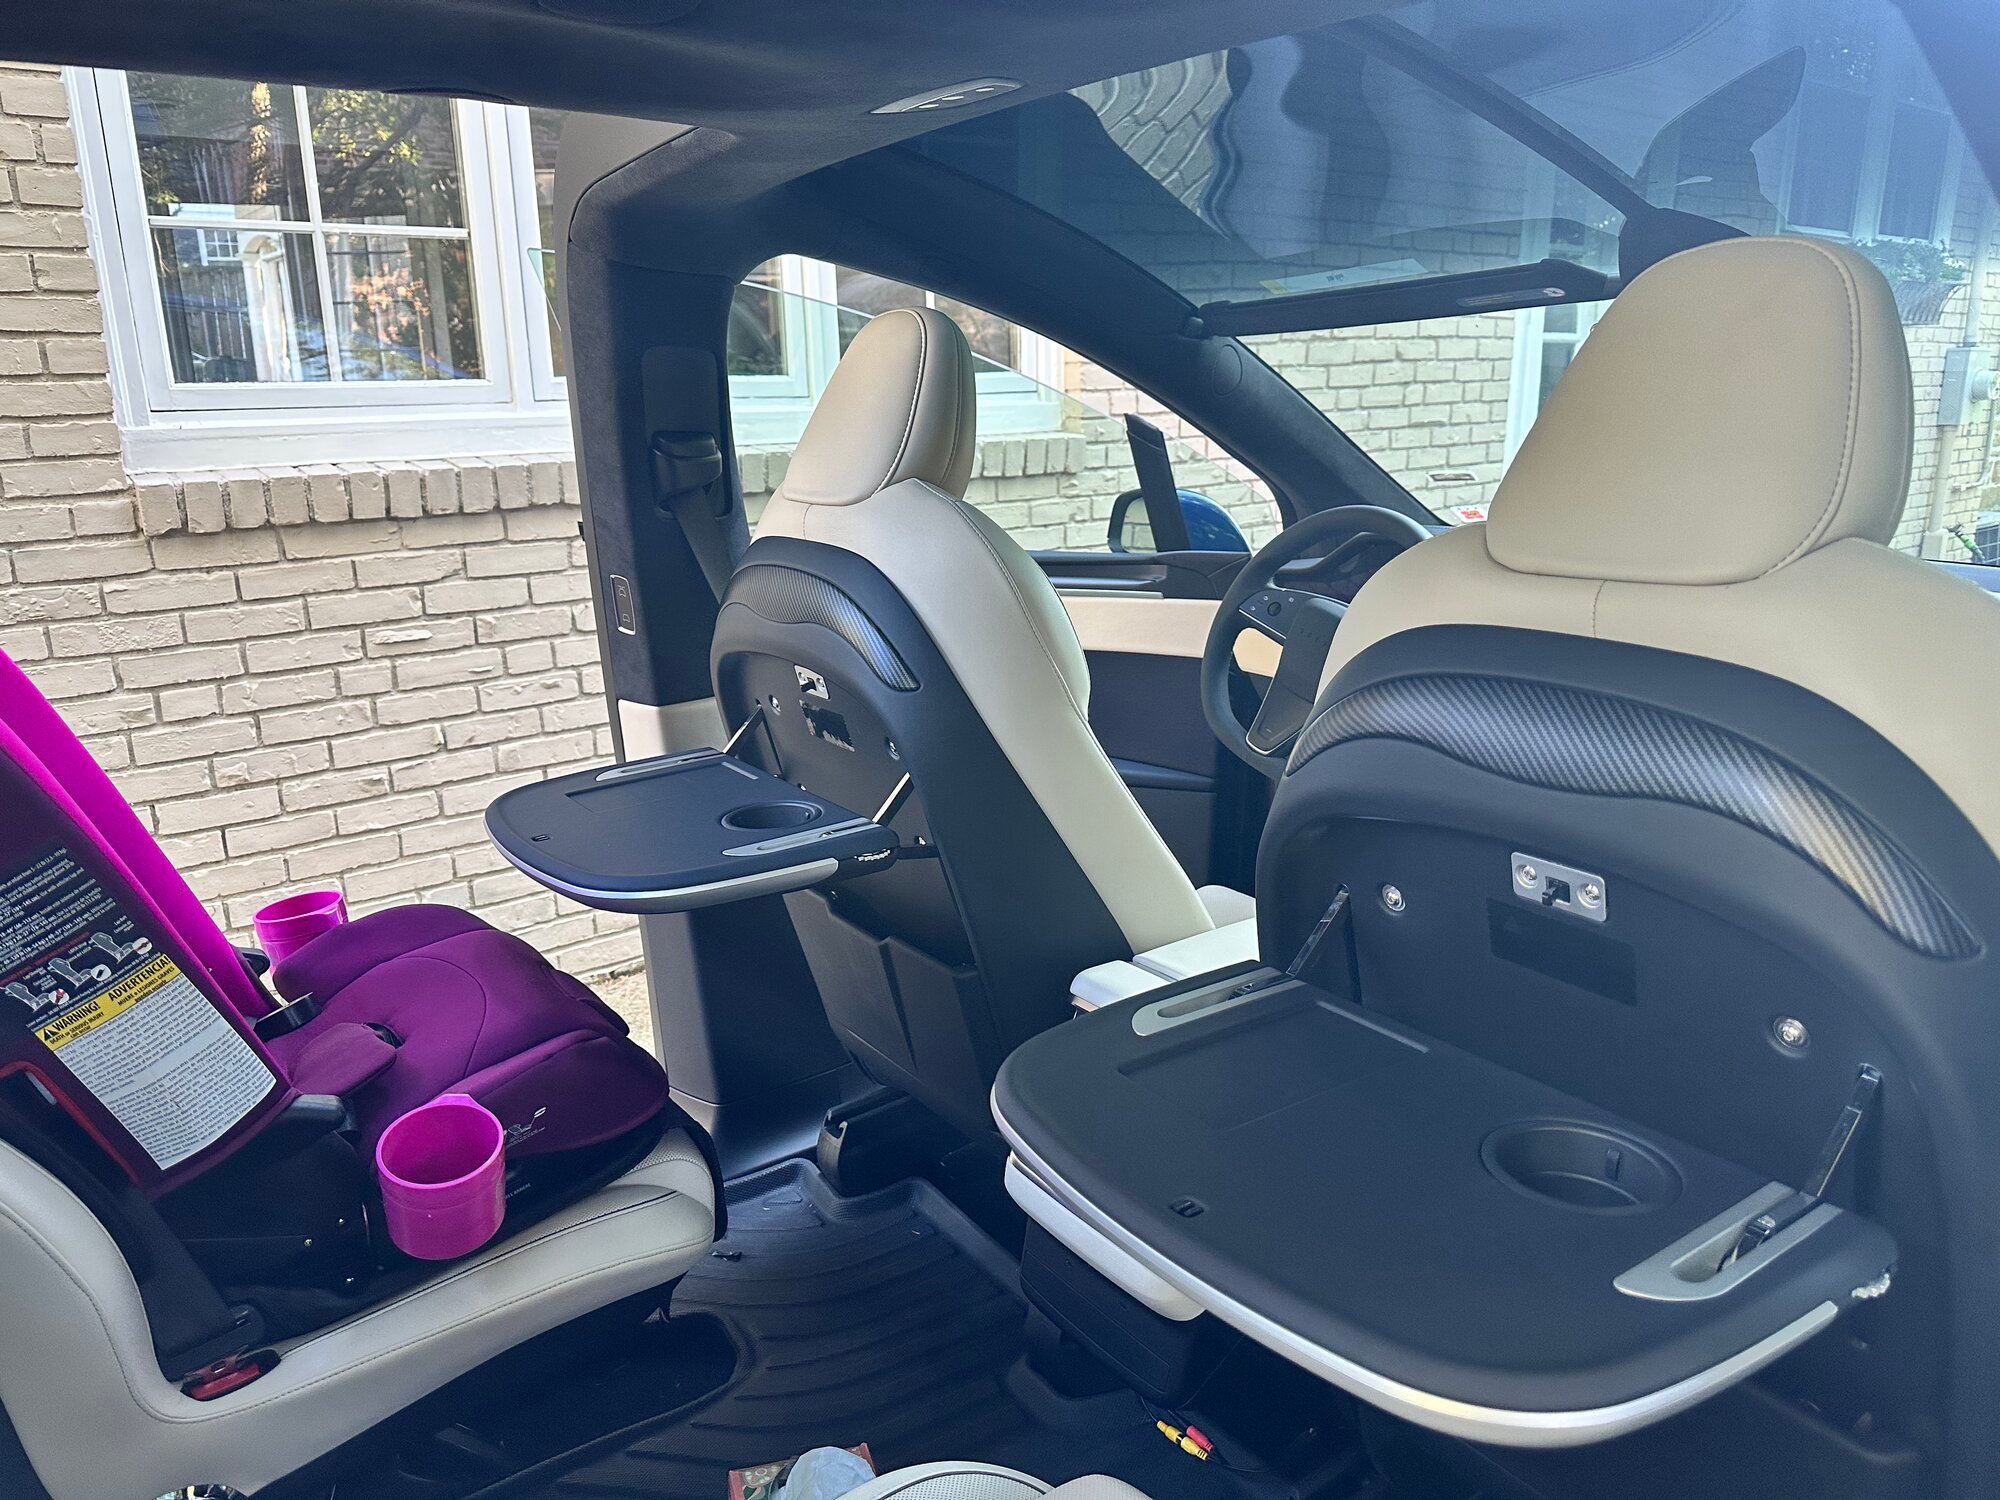 Tesla Model Y: Check Out These 10 Must-Have Accessories